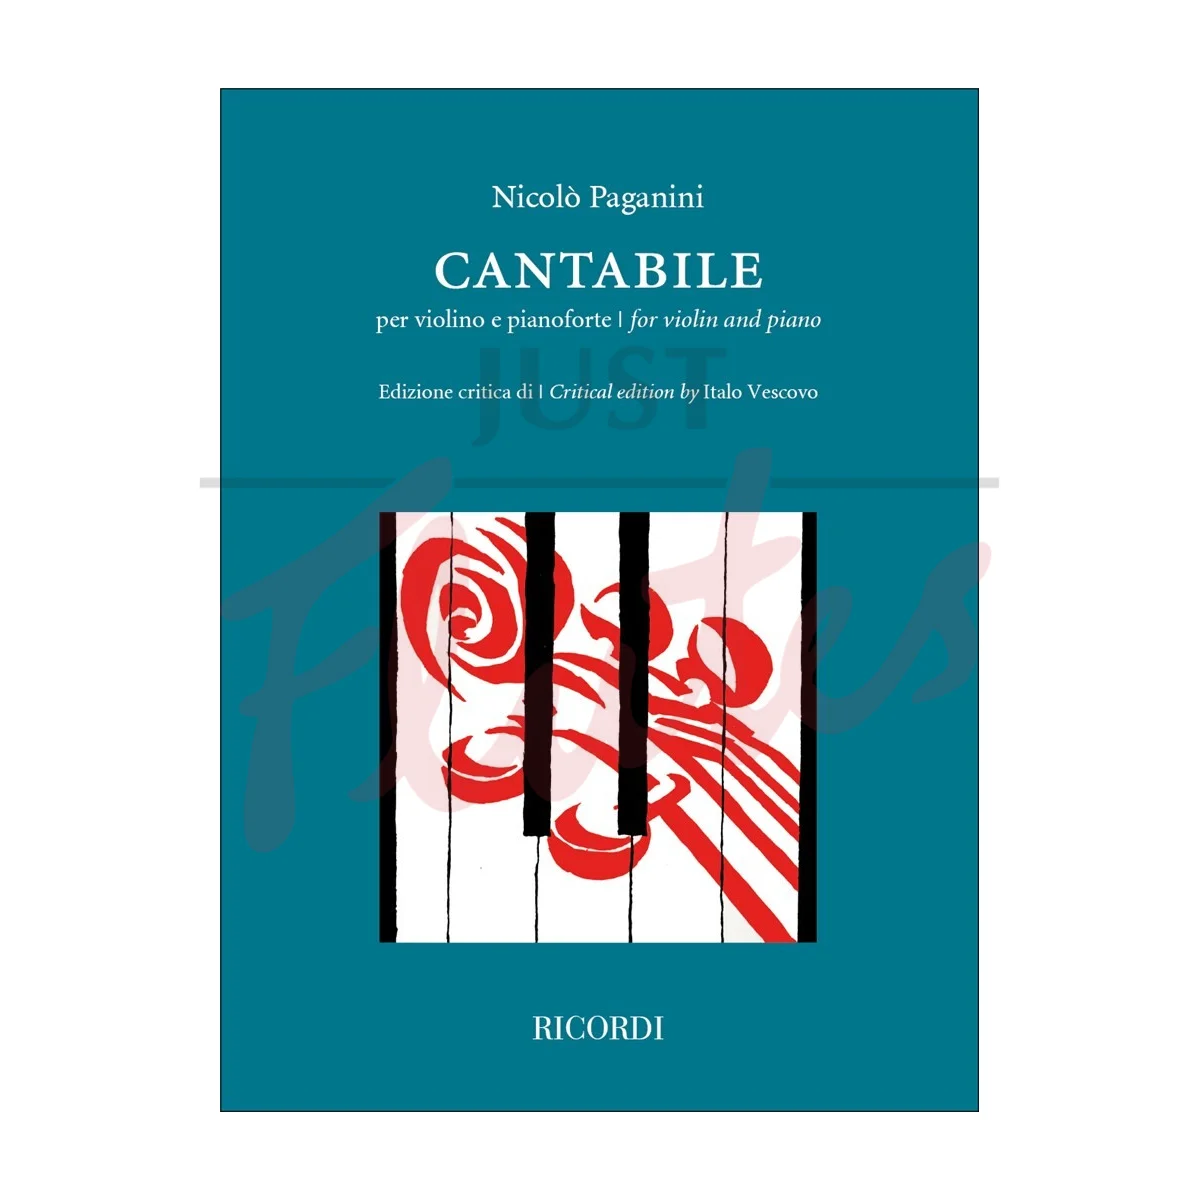 Cantabile for Violin and Piano